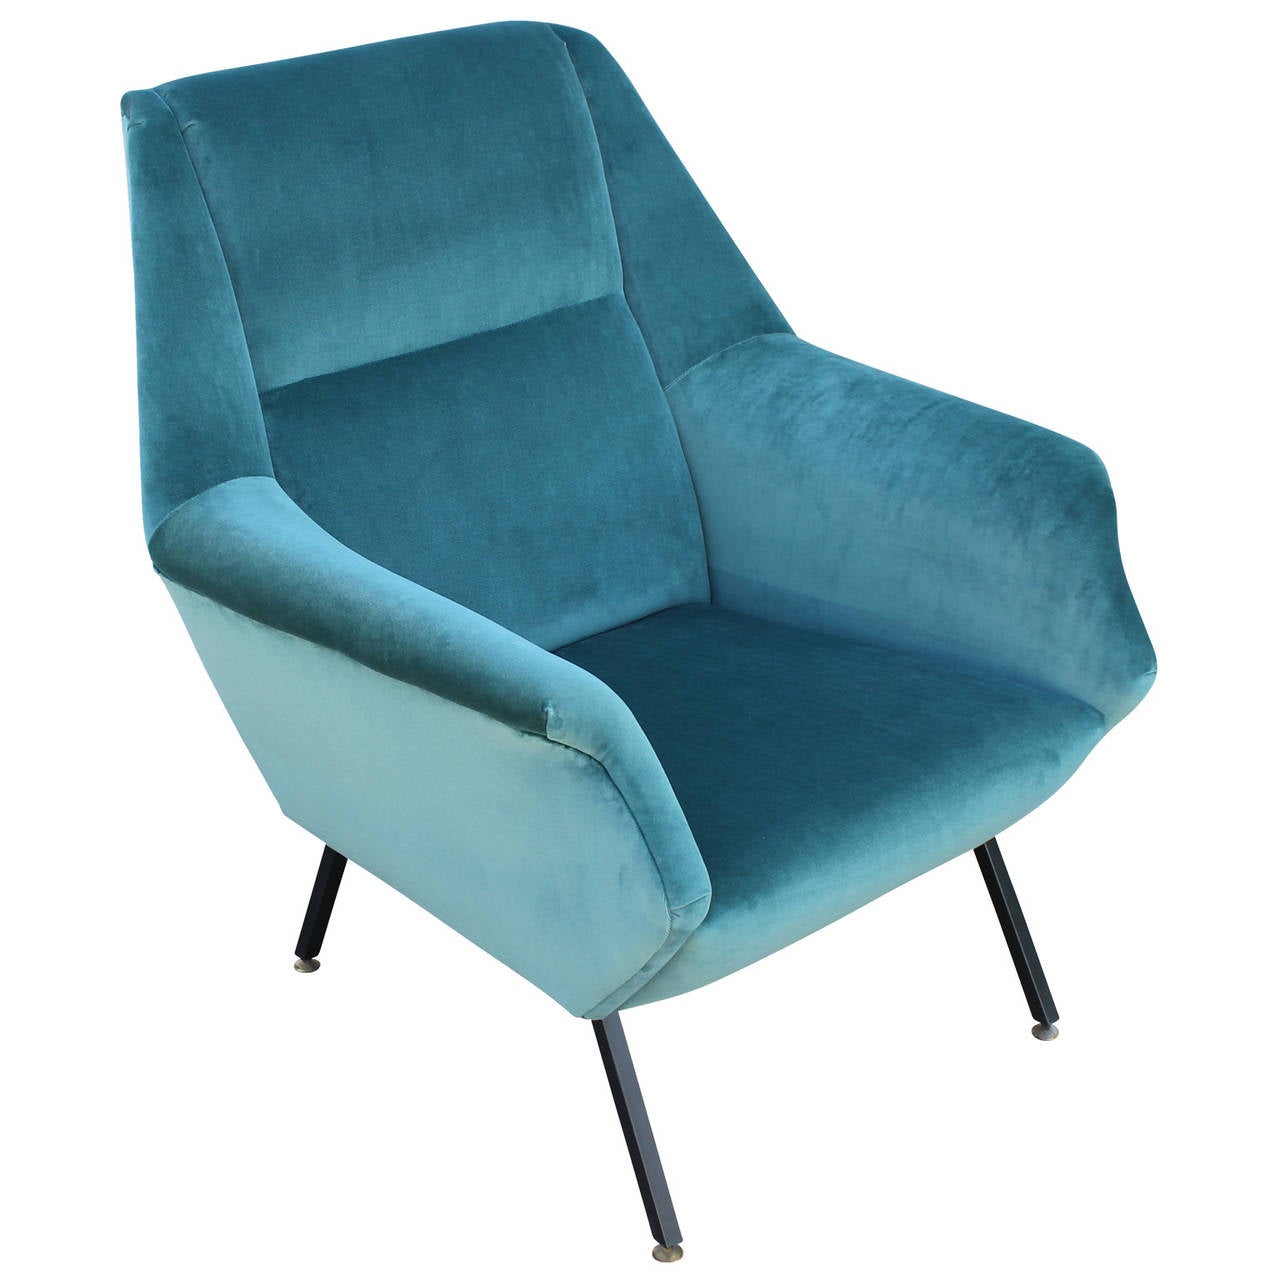 Mid-20th Century Pair of Fabulous Italian Lounge Chairs in Teal Velvet